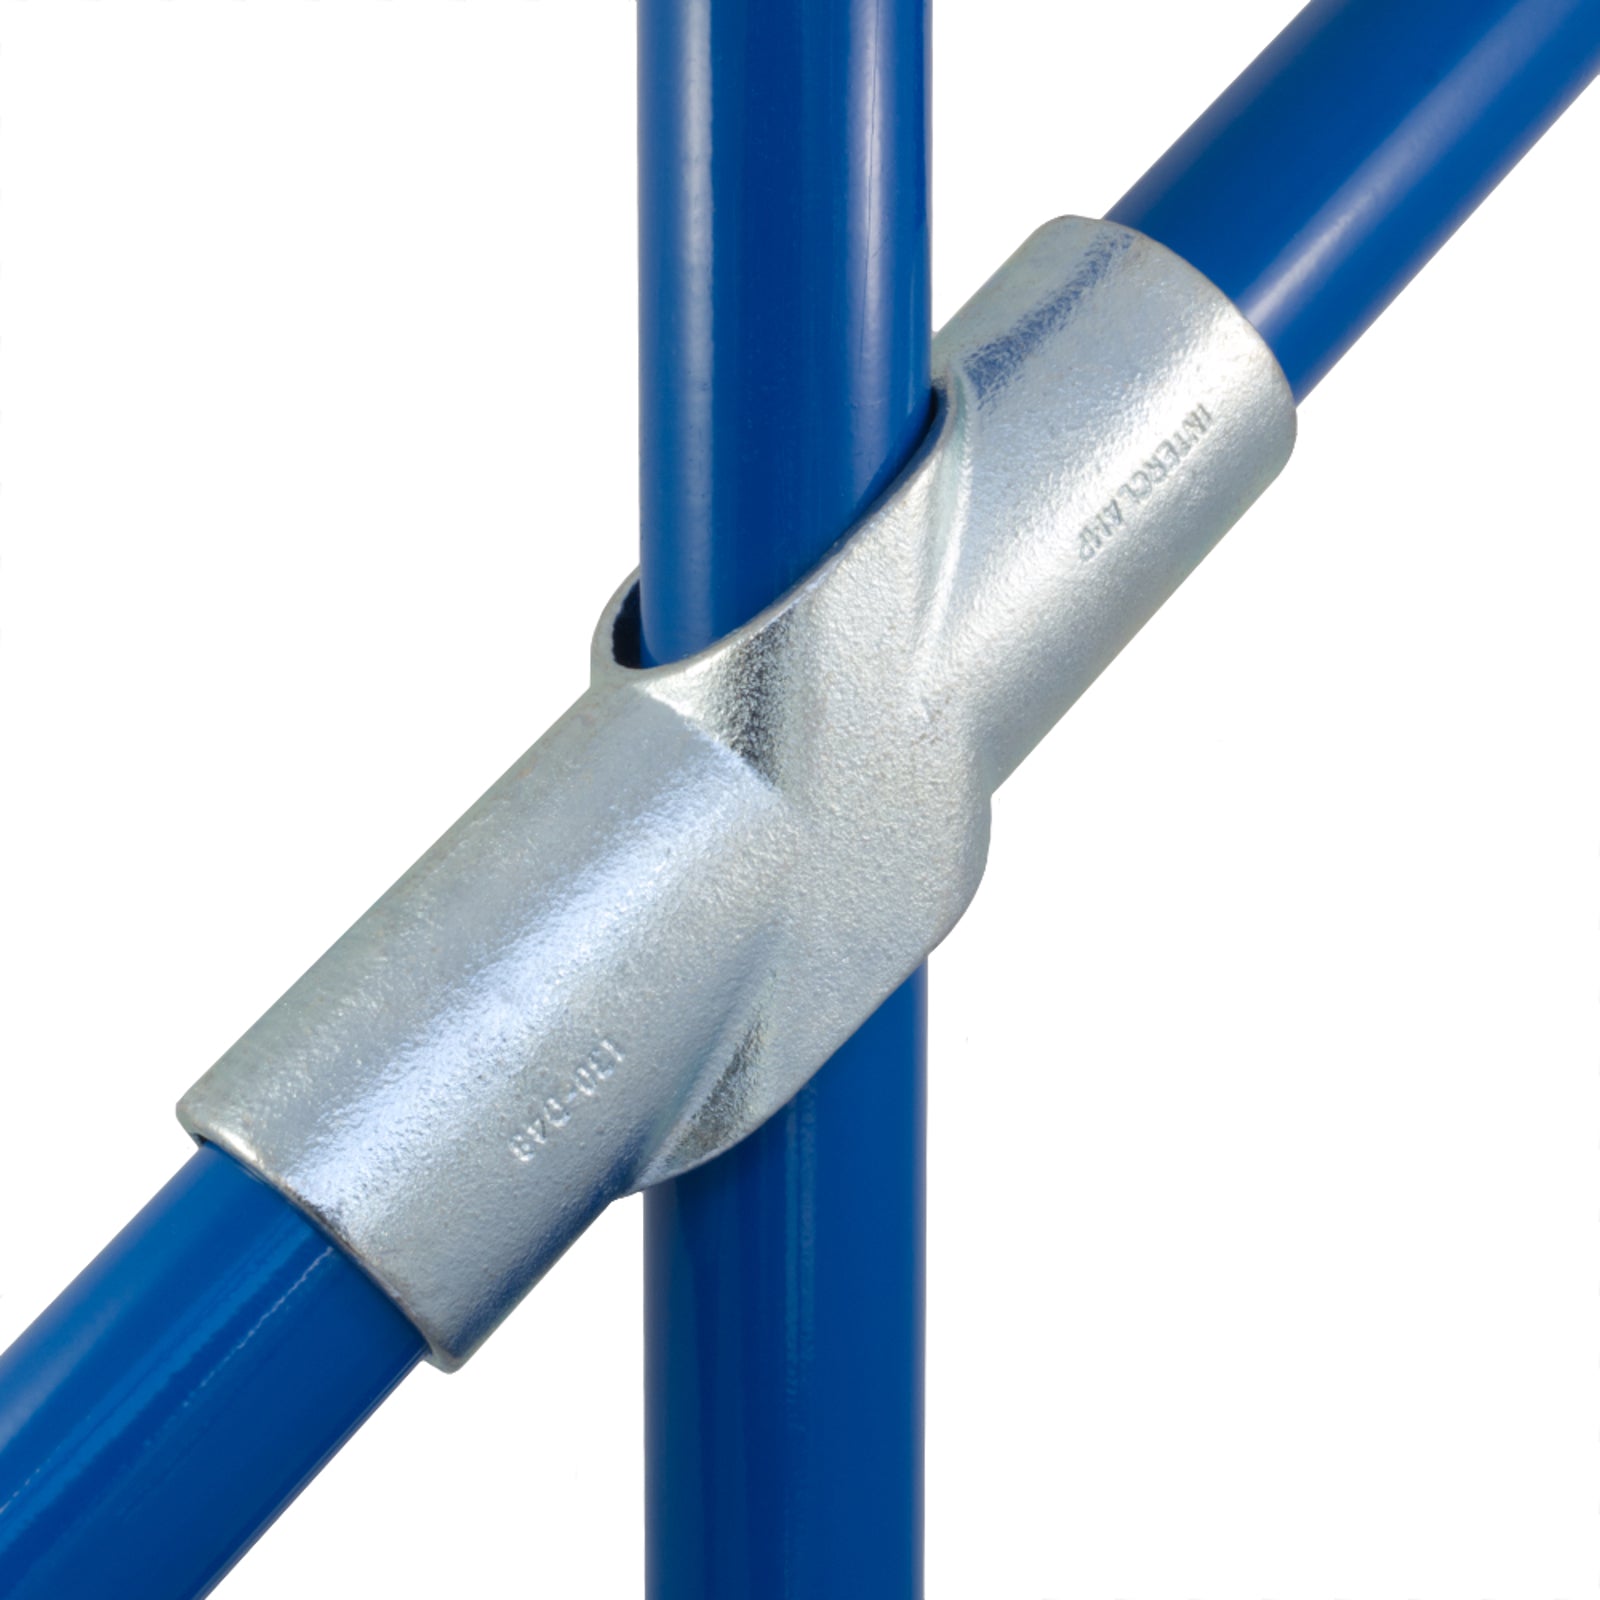 Adjustable Cross, 30 to 45 Degrees for Galvanised Pipe (Interclamp Code 130). Shop rail and pipe fittings online chain.com.au. Australia wide shipping.